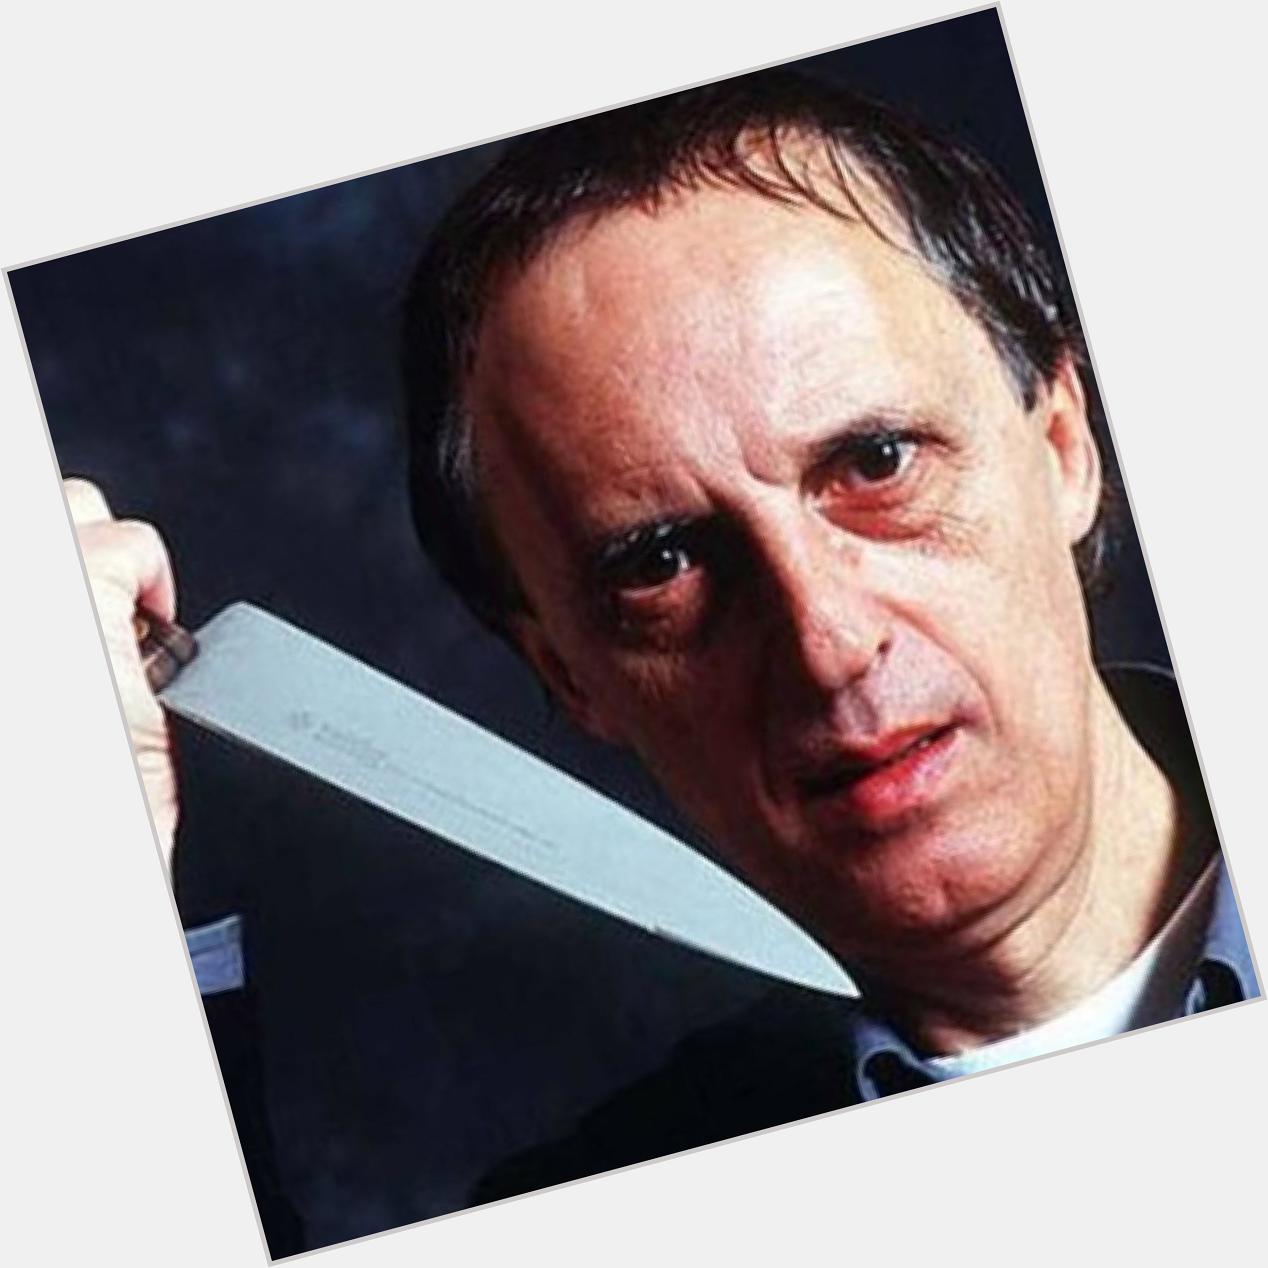 Happy birthday to director, producer, and screenwriter of films, DARIO ARGENTO! 